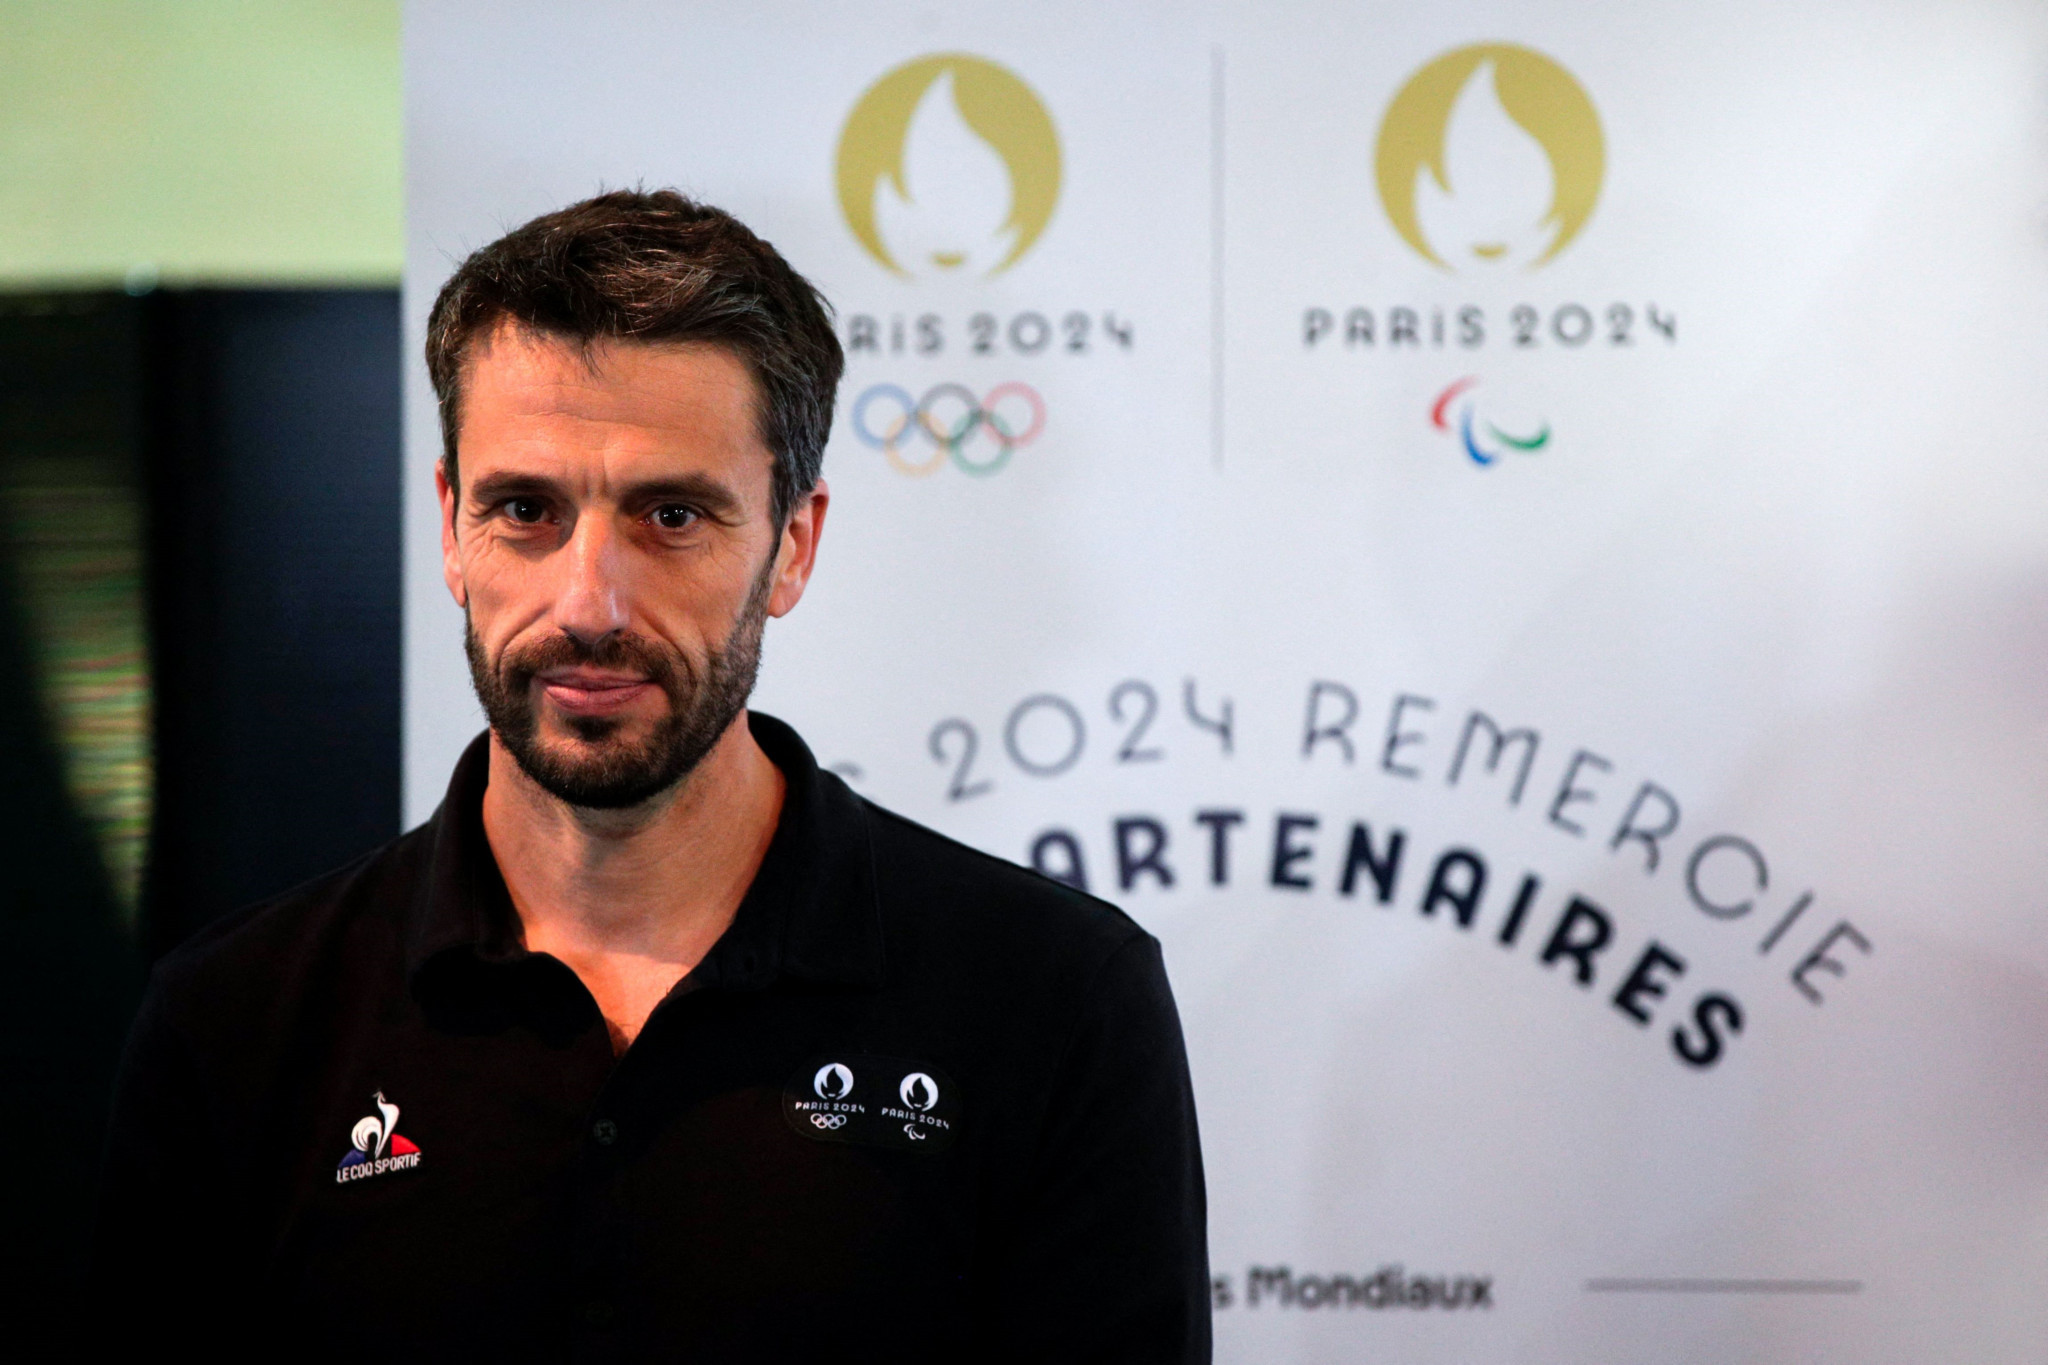 Paris 2024 President Tony Estanguet explained that work was still in progress to establish the best route for the Torch Relay to pass through the Vendée ©Getty Images